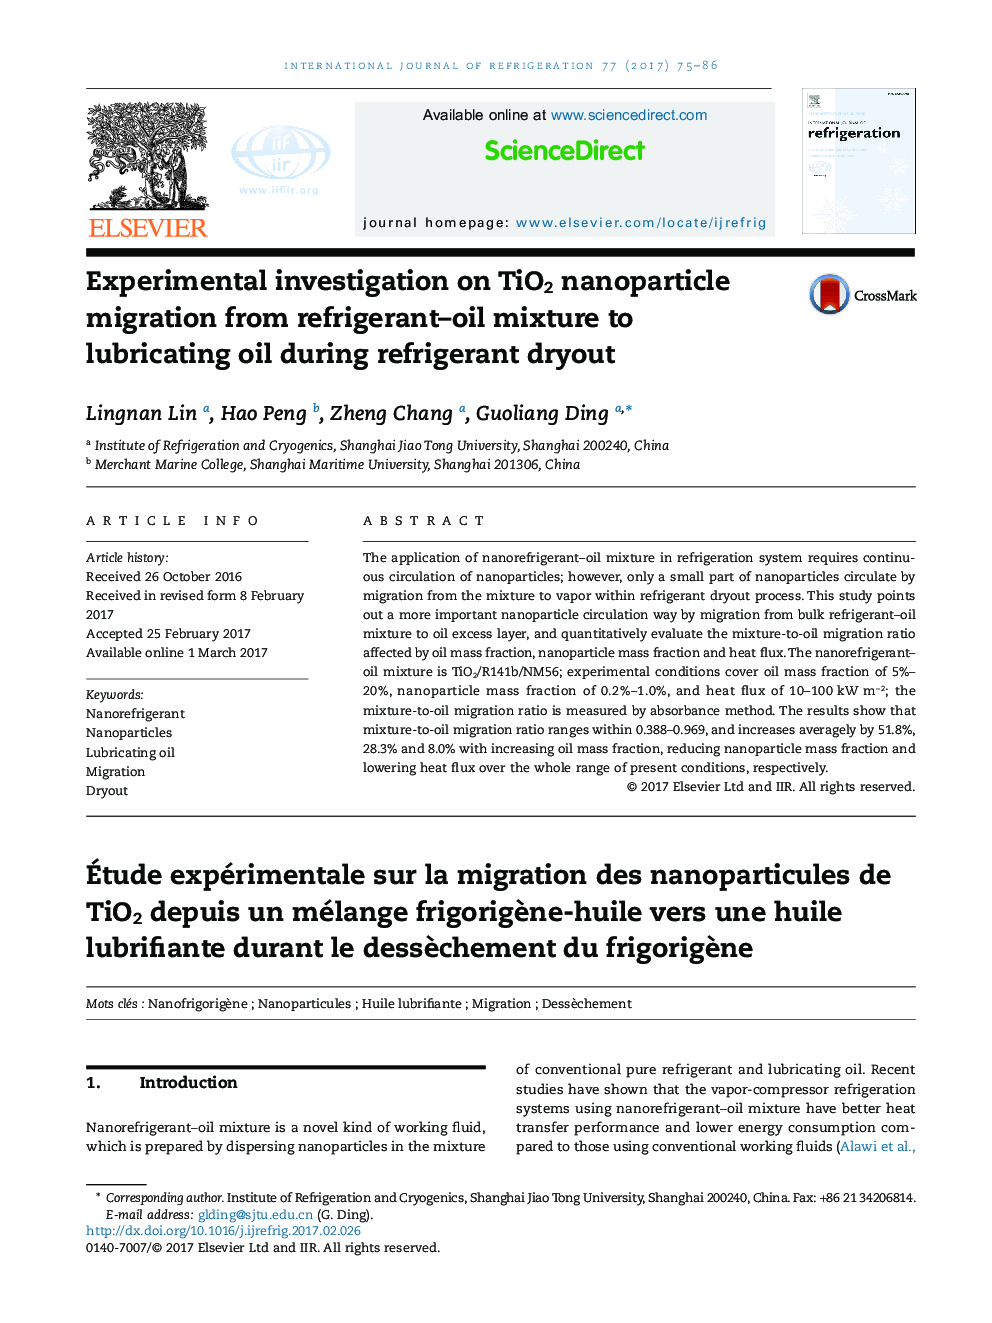 Experimental investigation on TiO2 nanoparticle migration from refrigerant-oil mixture to lubricating oil during refrigerant dryout